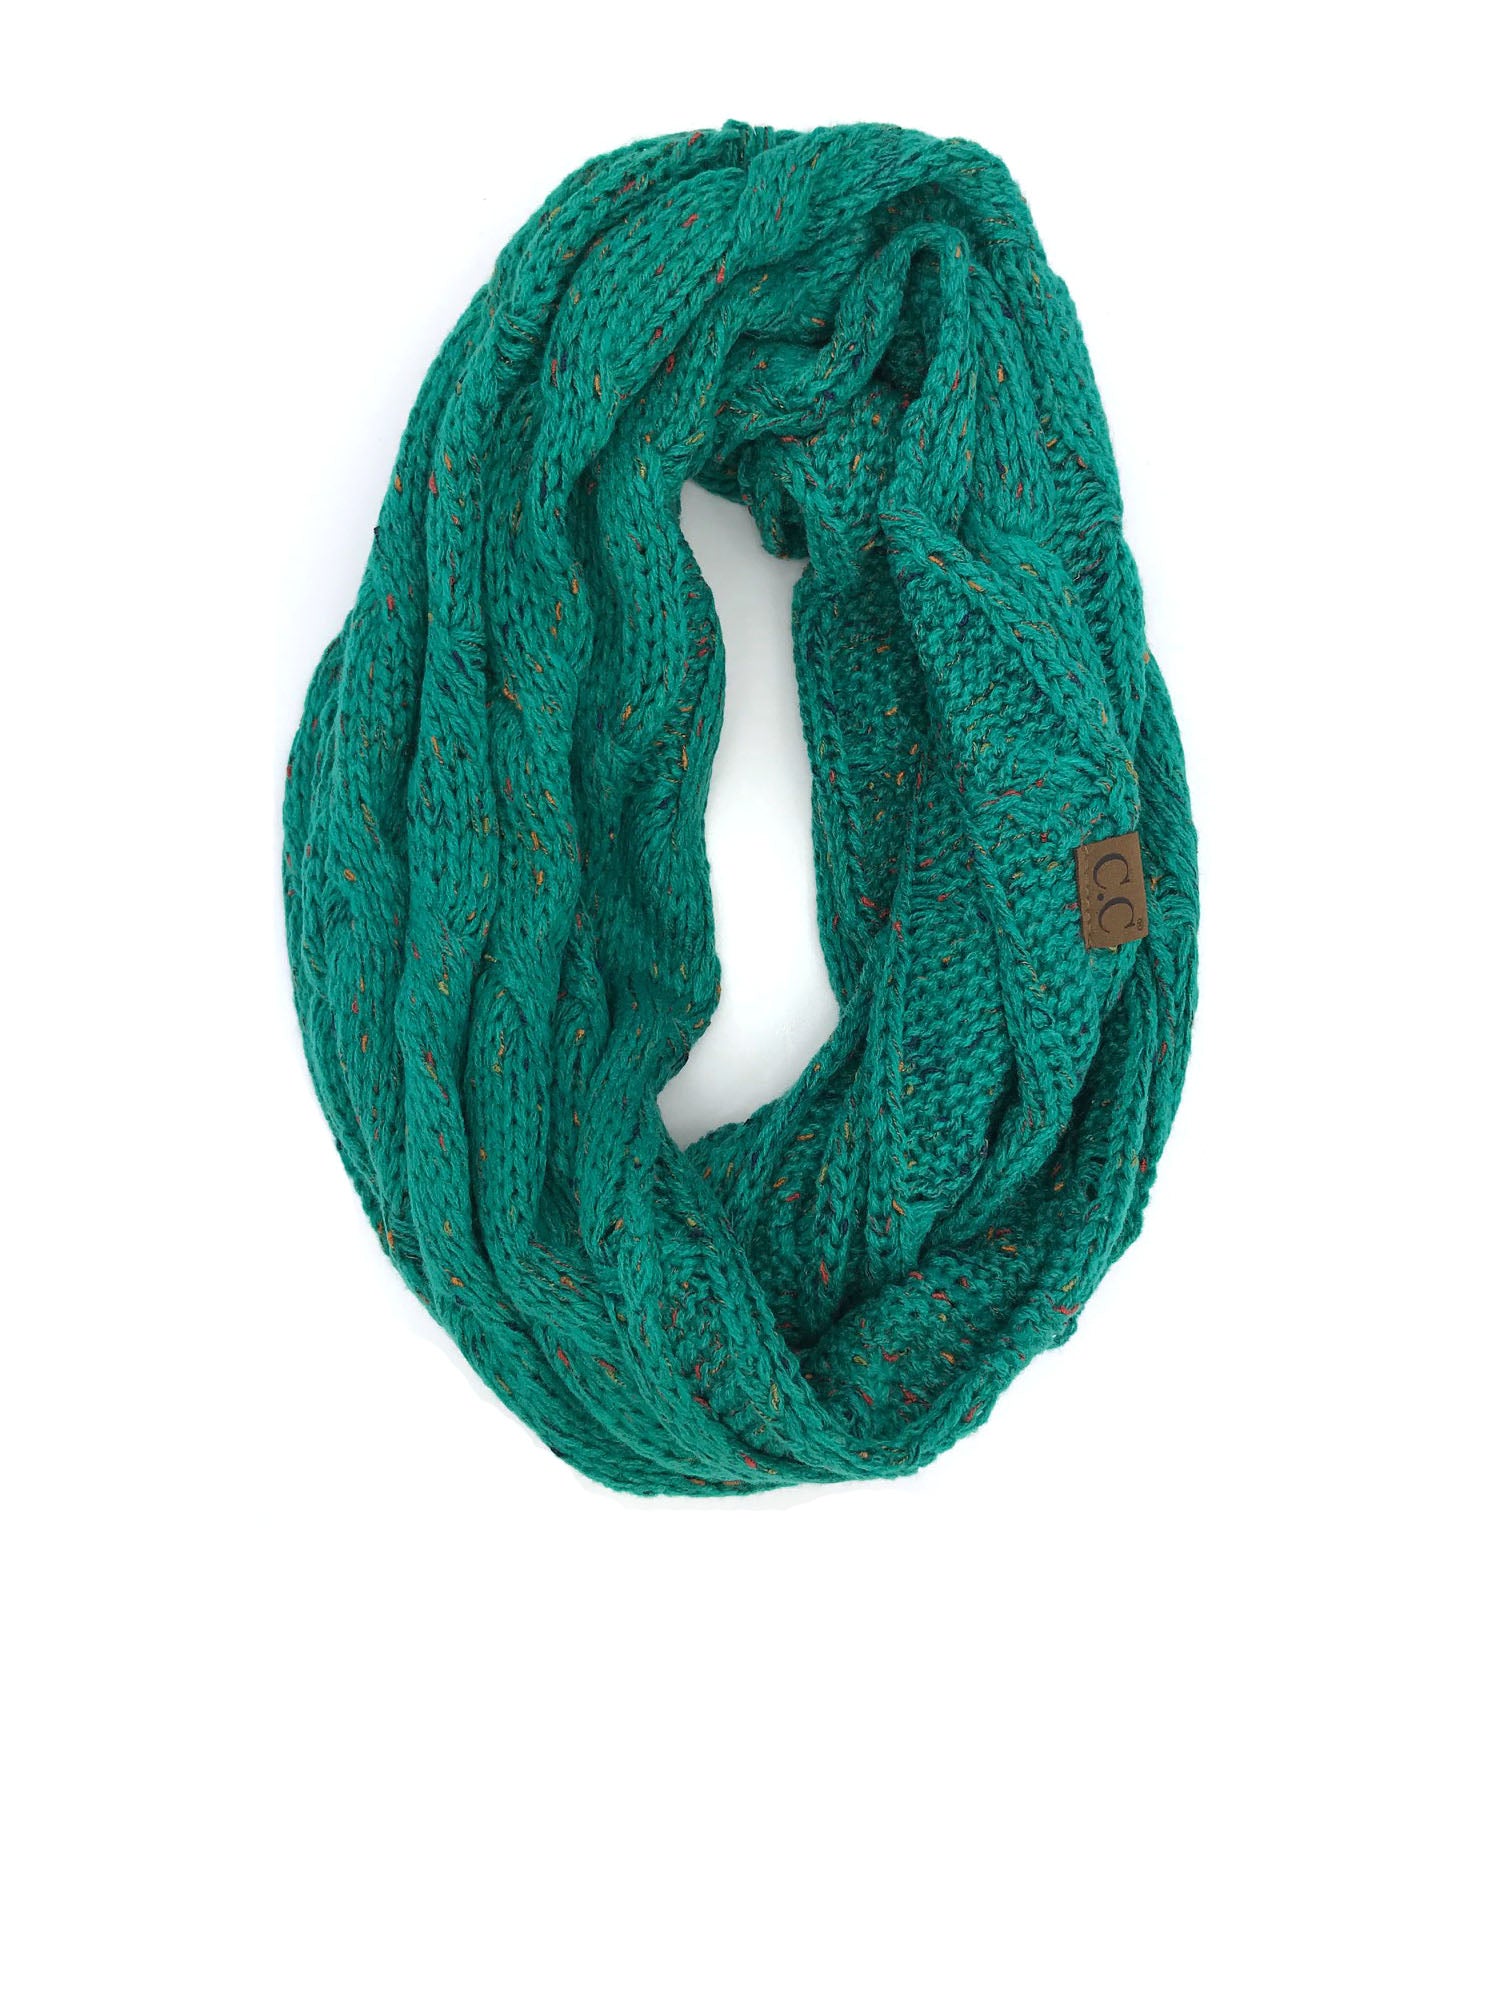 SF33-Seagreen Speckled Infinity Scarf